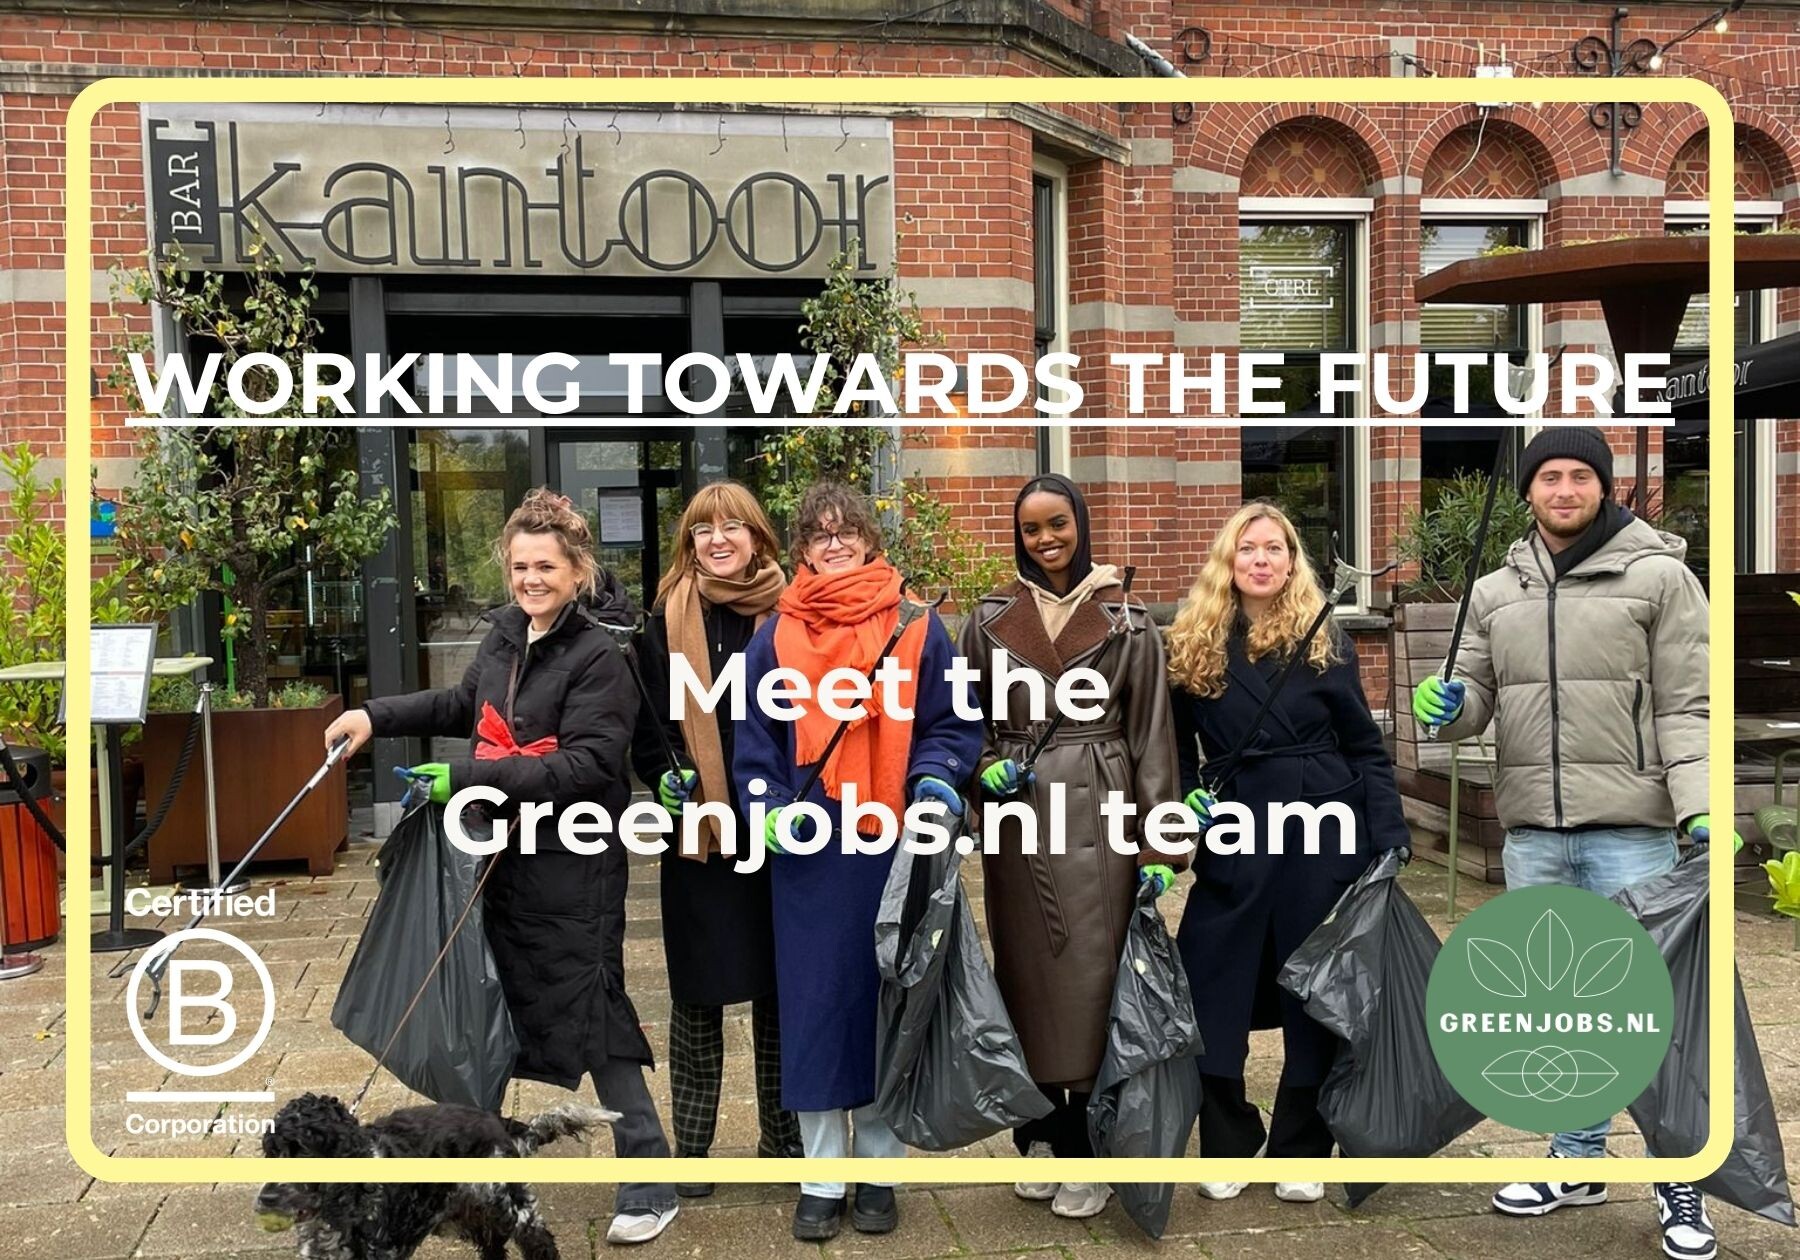 Meet the Greenjobs.nl team: working towards the future!